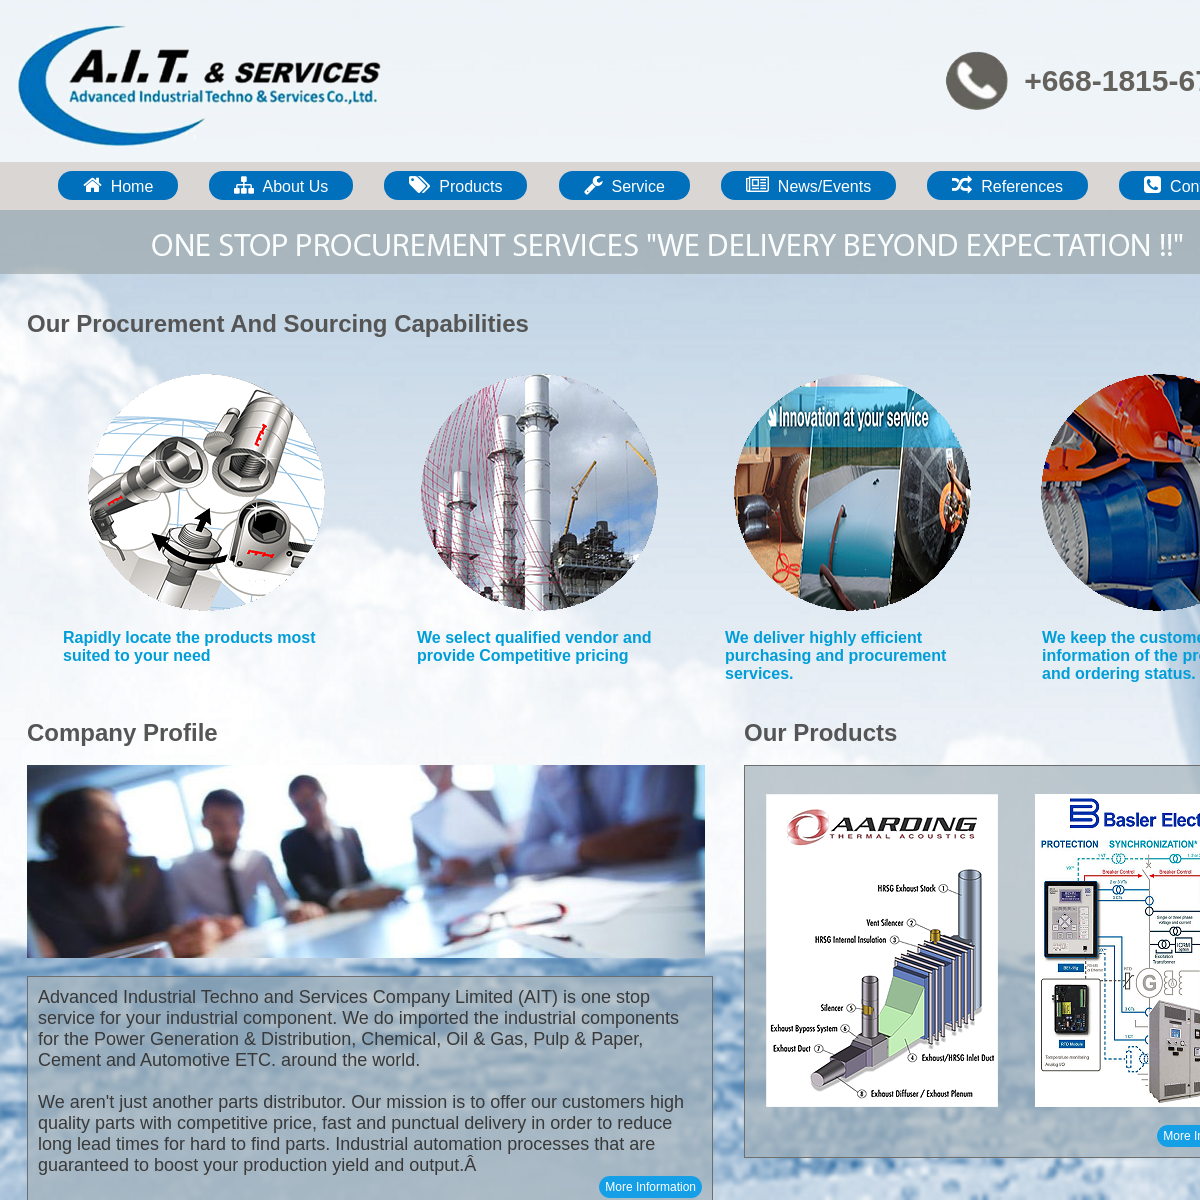 A complete backup of aitandservices.com